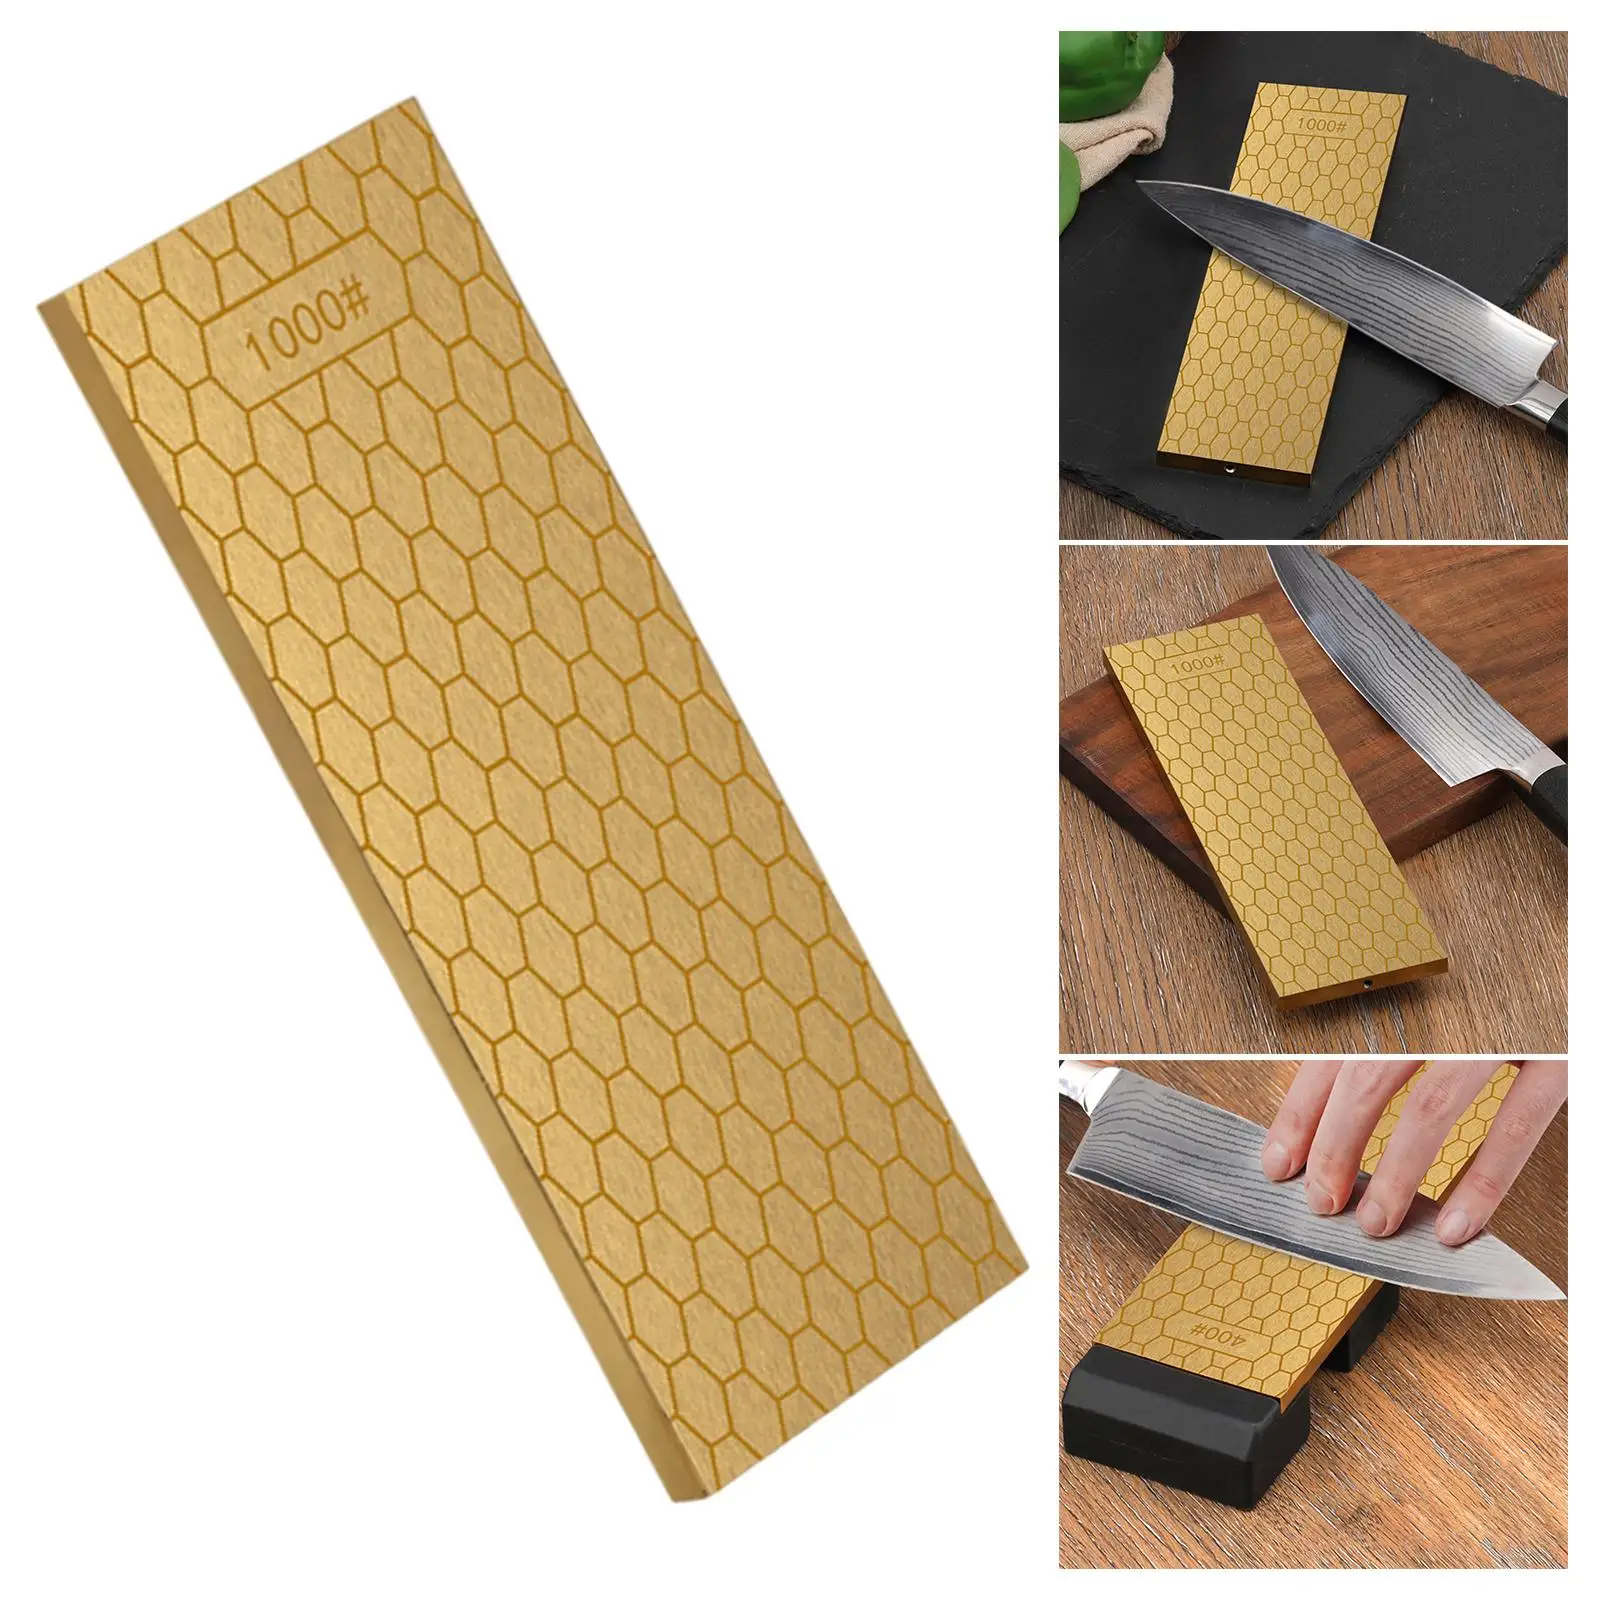 Diamond Sharpening Stone Plate Sharpening Stone Professional Stone for Kitchen Sharpening Dull Blunt or Tired Edge 400 Grit Tool